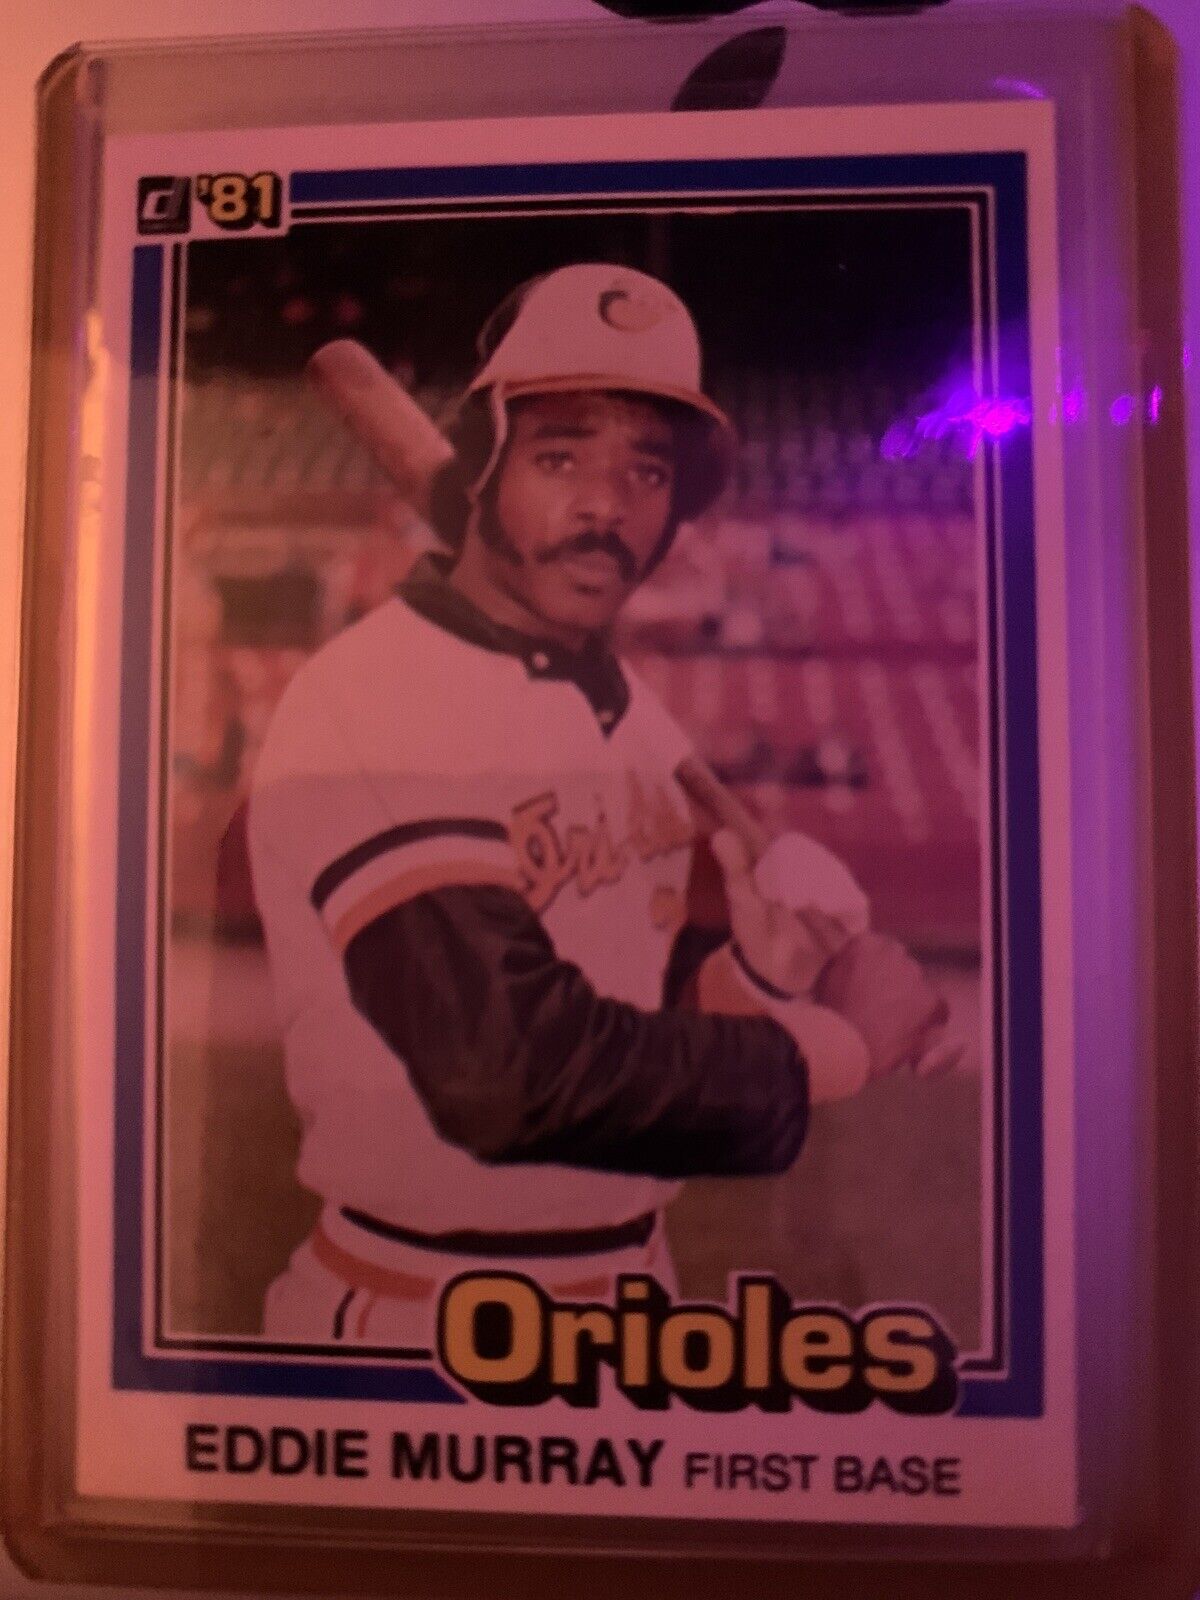 1981 Topps Eddie Murray First Base 1st Edition Baltimore Orioles